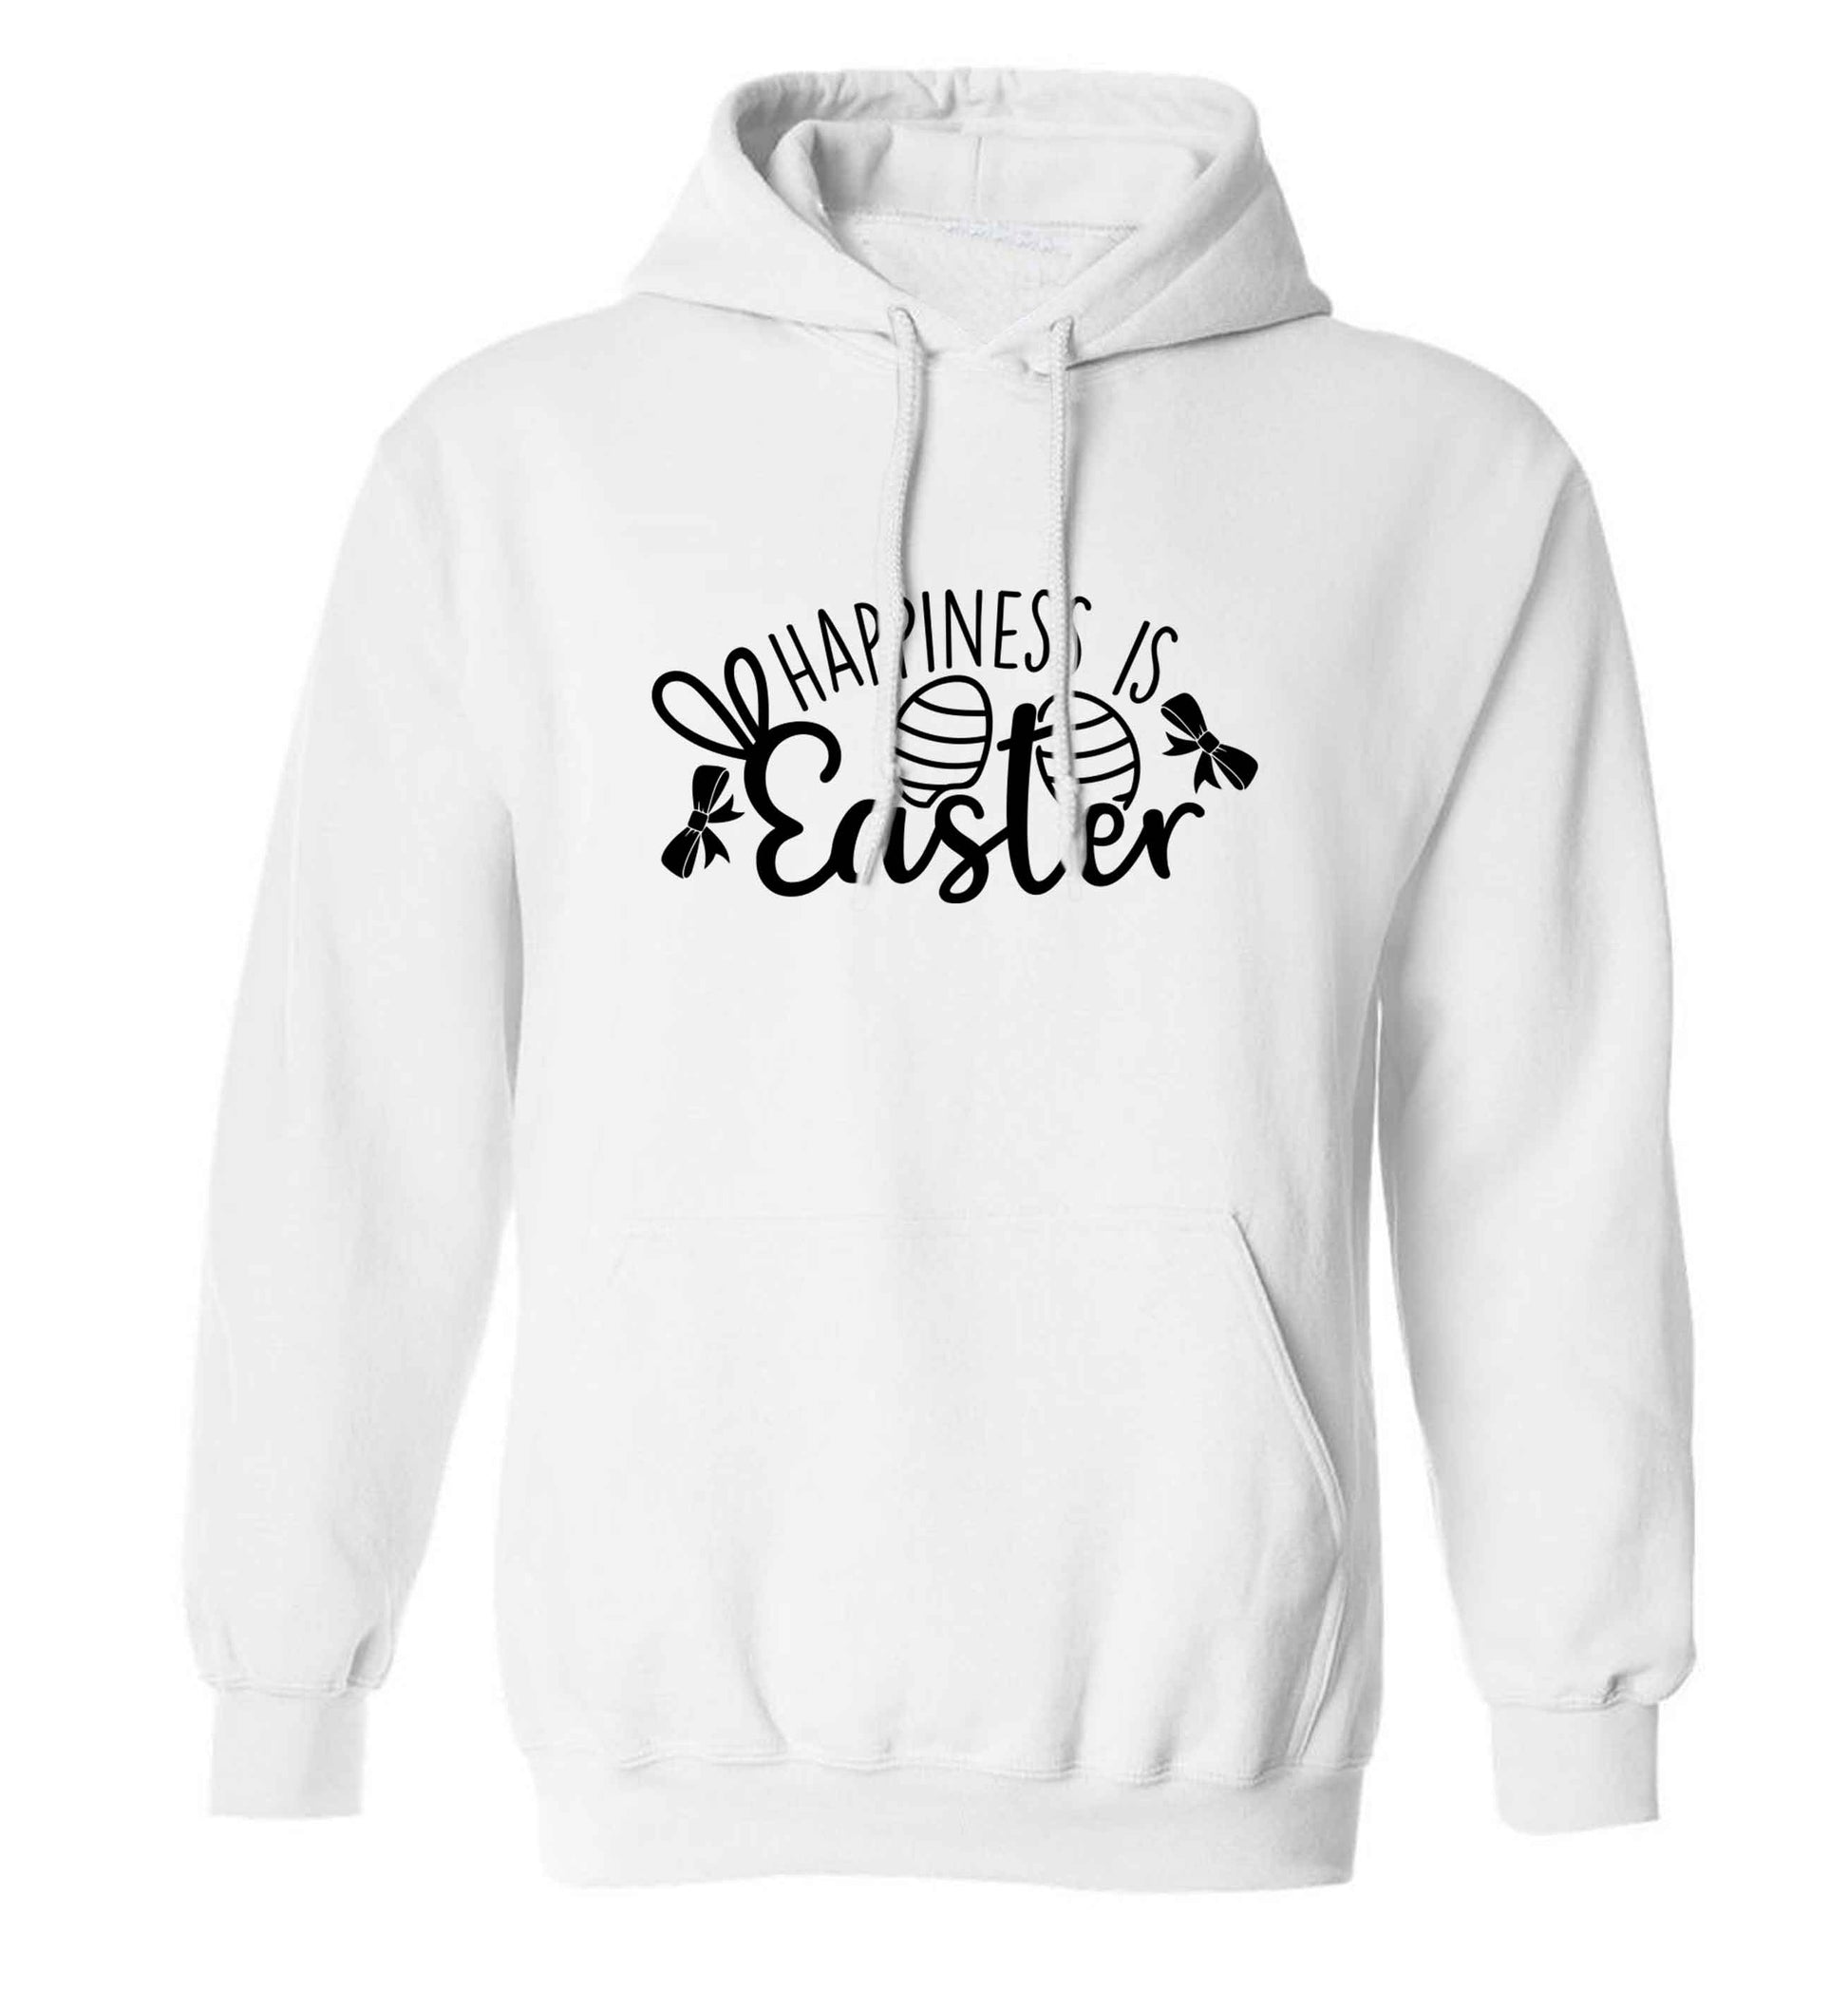 Happiness is easter adults unisex white hoodie 2XL